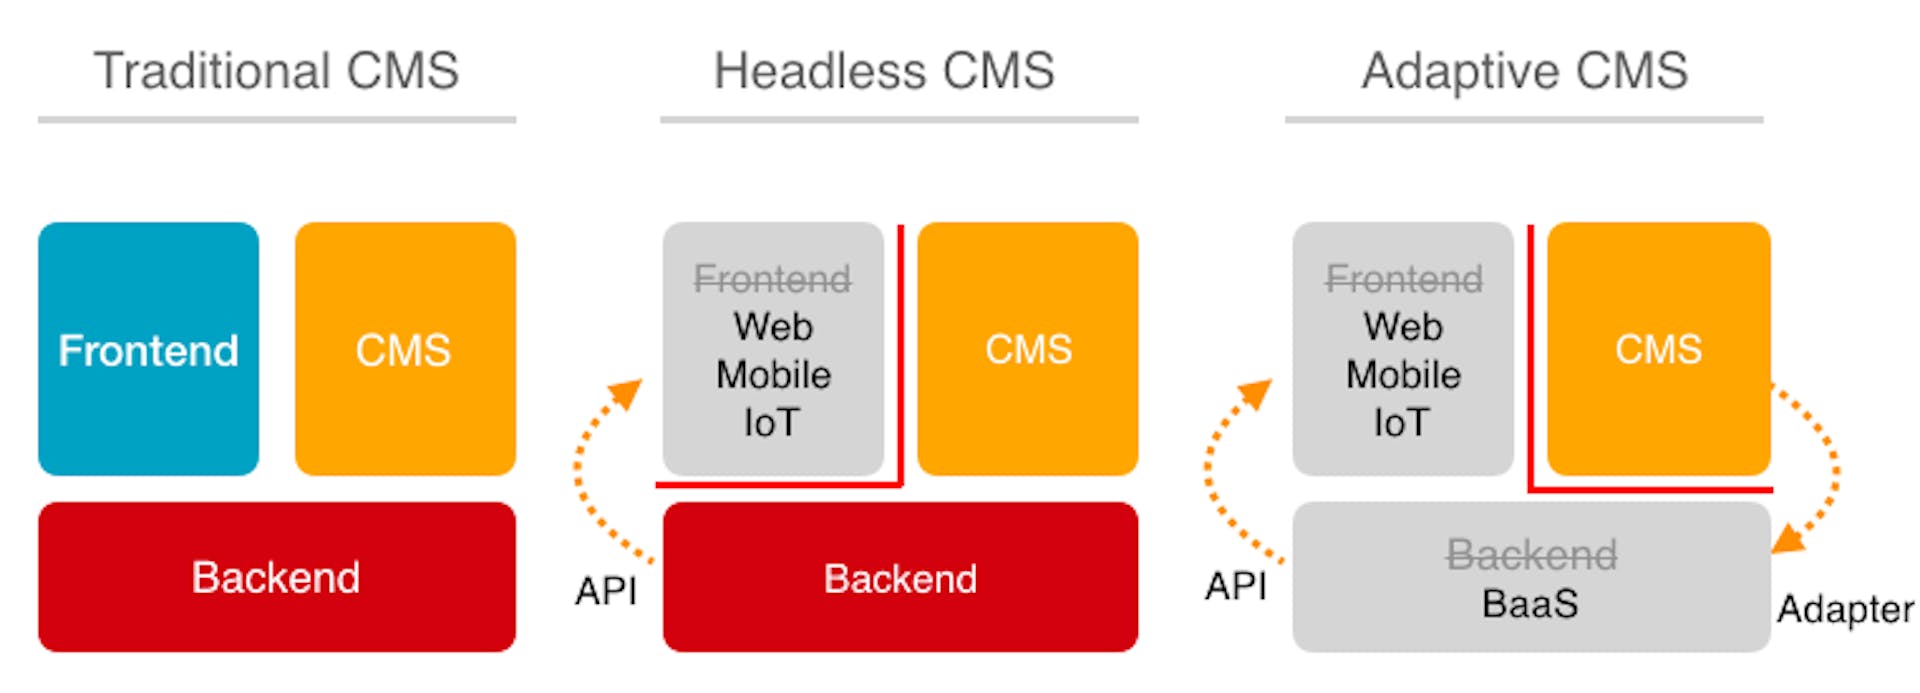 featured image - What is Adaptive CMS?